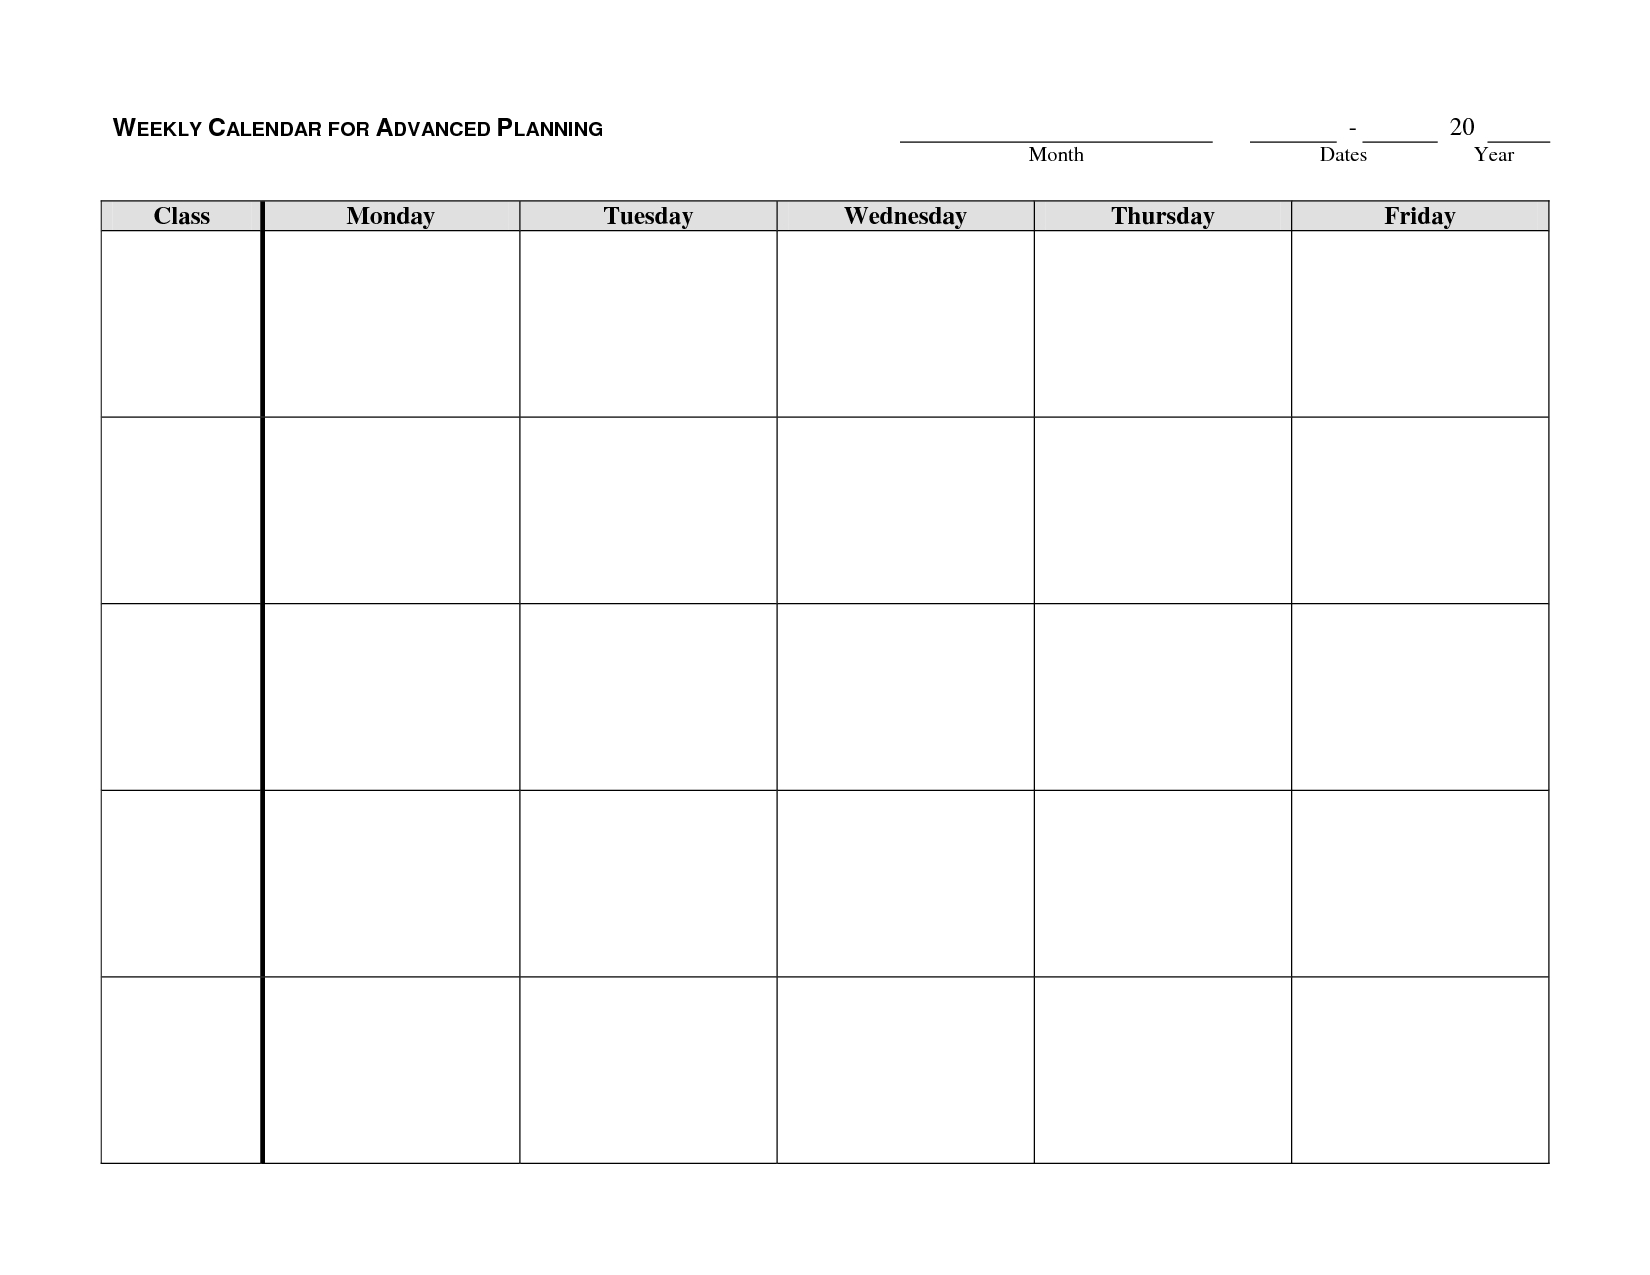 Weekly Calendar Template - Google Search | Autism/school-Monday To Friday Monthly Calendar Template